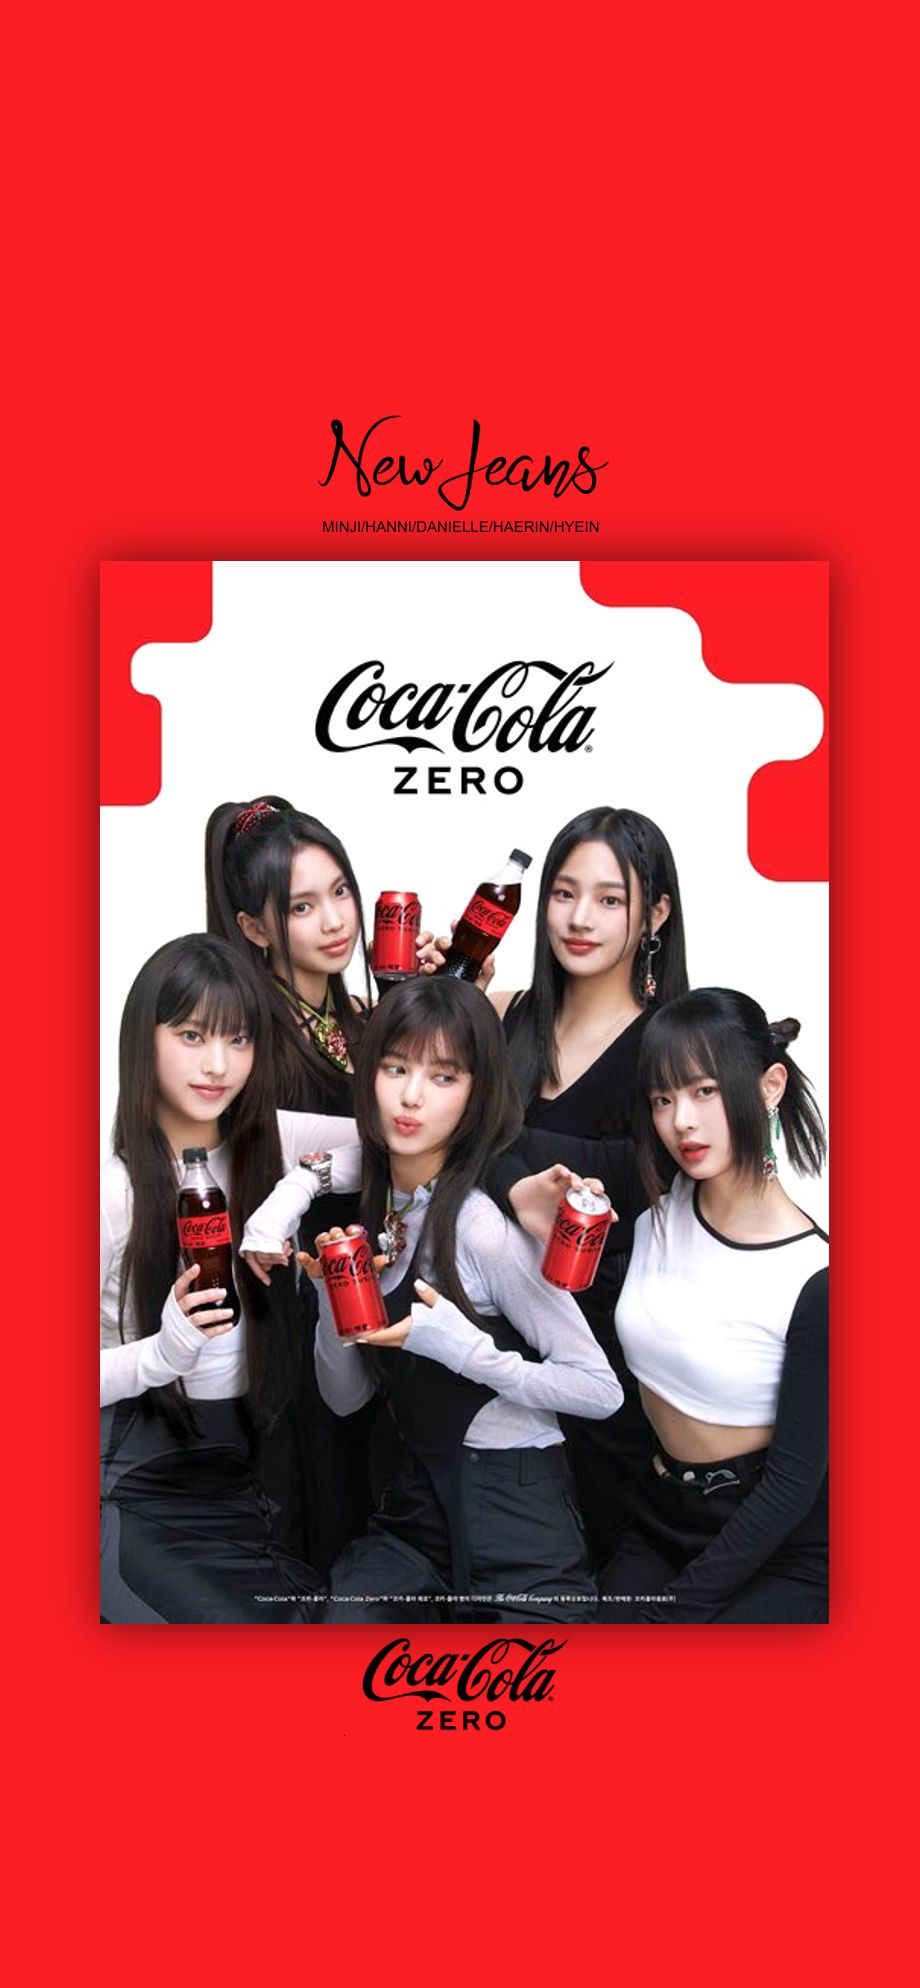 Coca Cola Zero's new jeans campaign featuring the new girl group, New Jeans - NewJeans